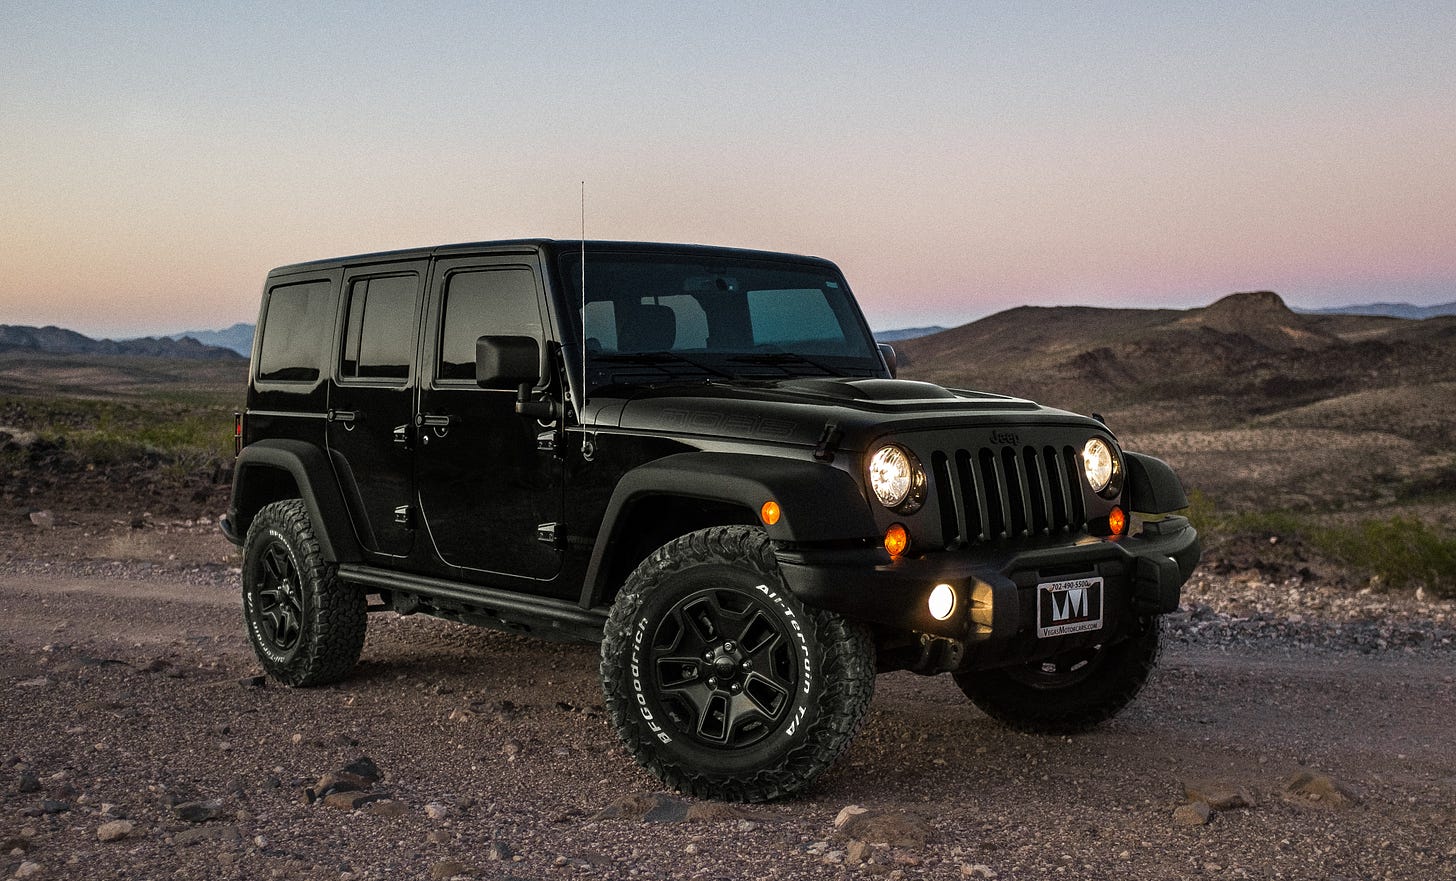 A black jeep set on a hilly dry landscape with a clear evening sky